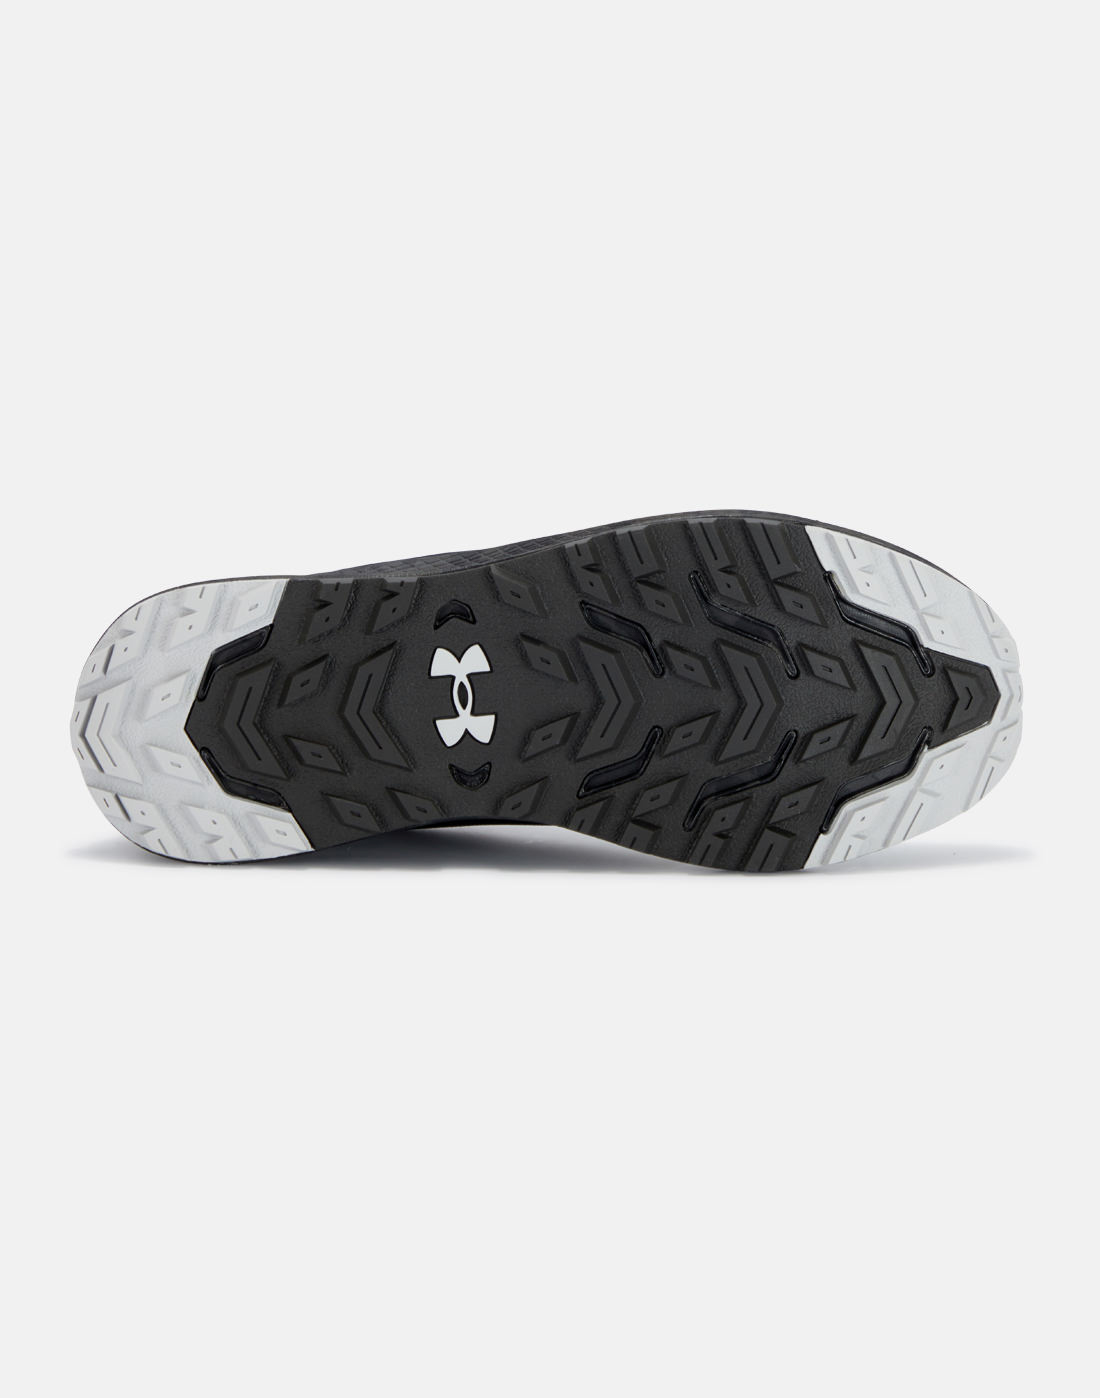 Under Armour Womens Charged Bandit Trail 2 - Grey | Life Style Sports IE